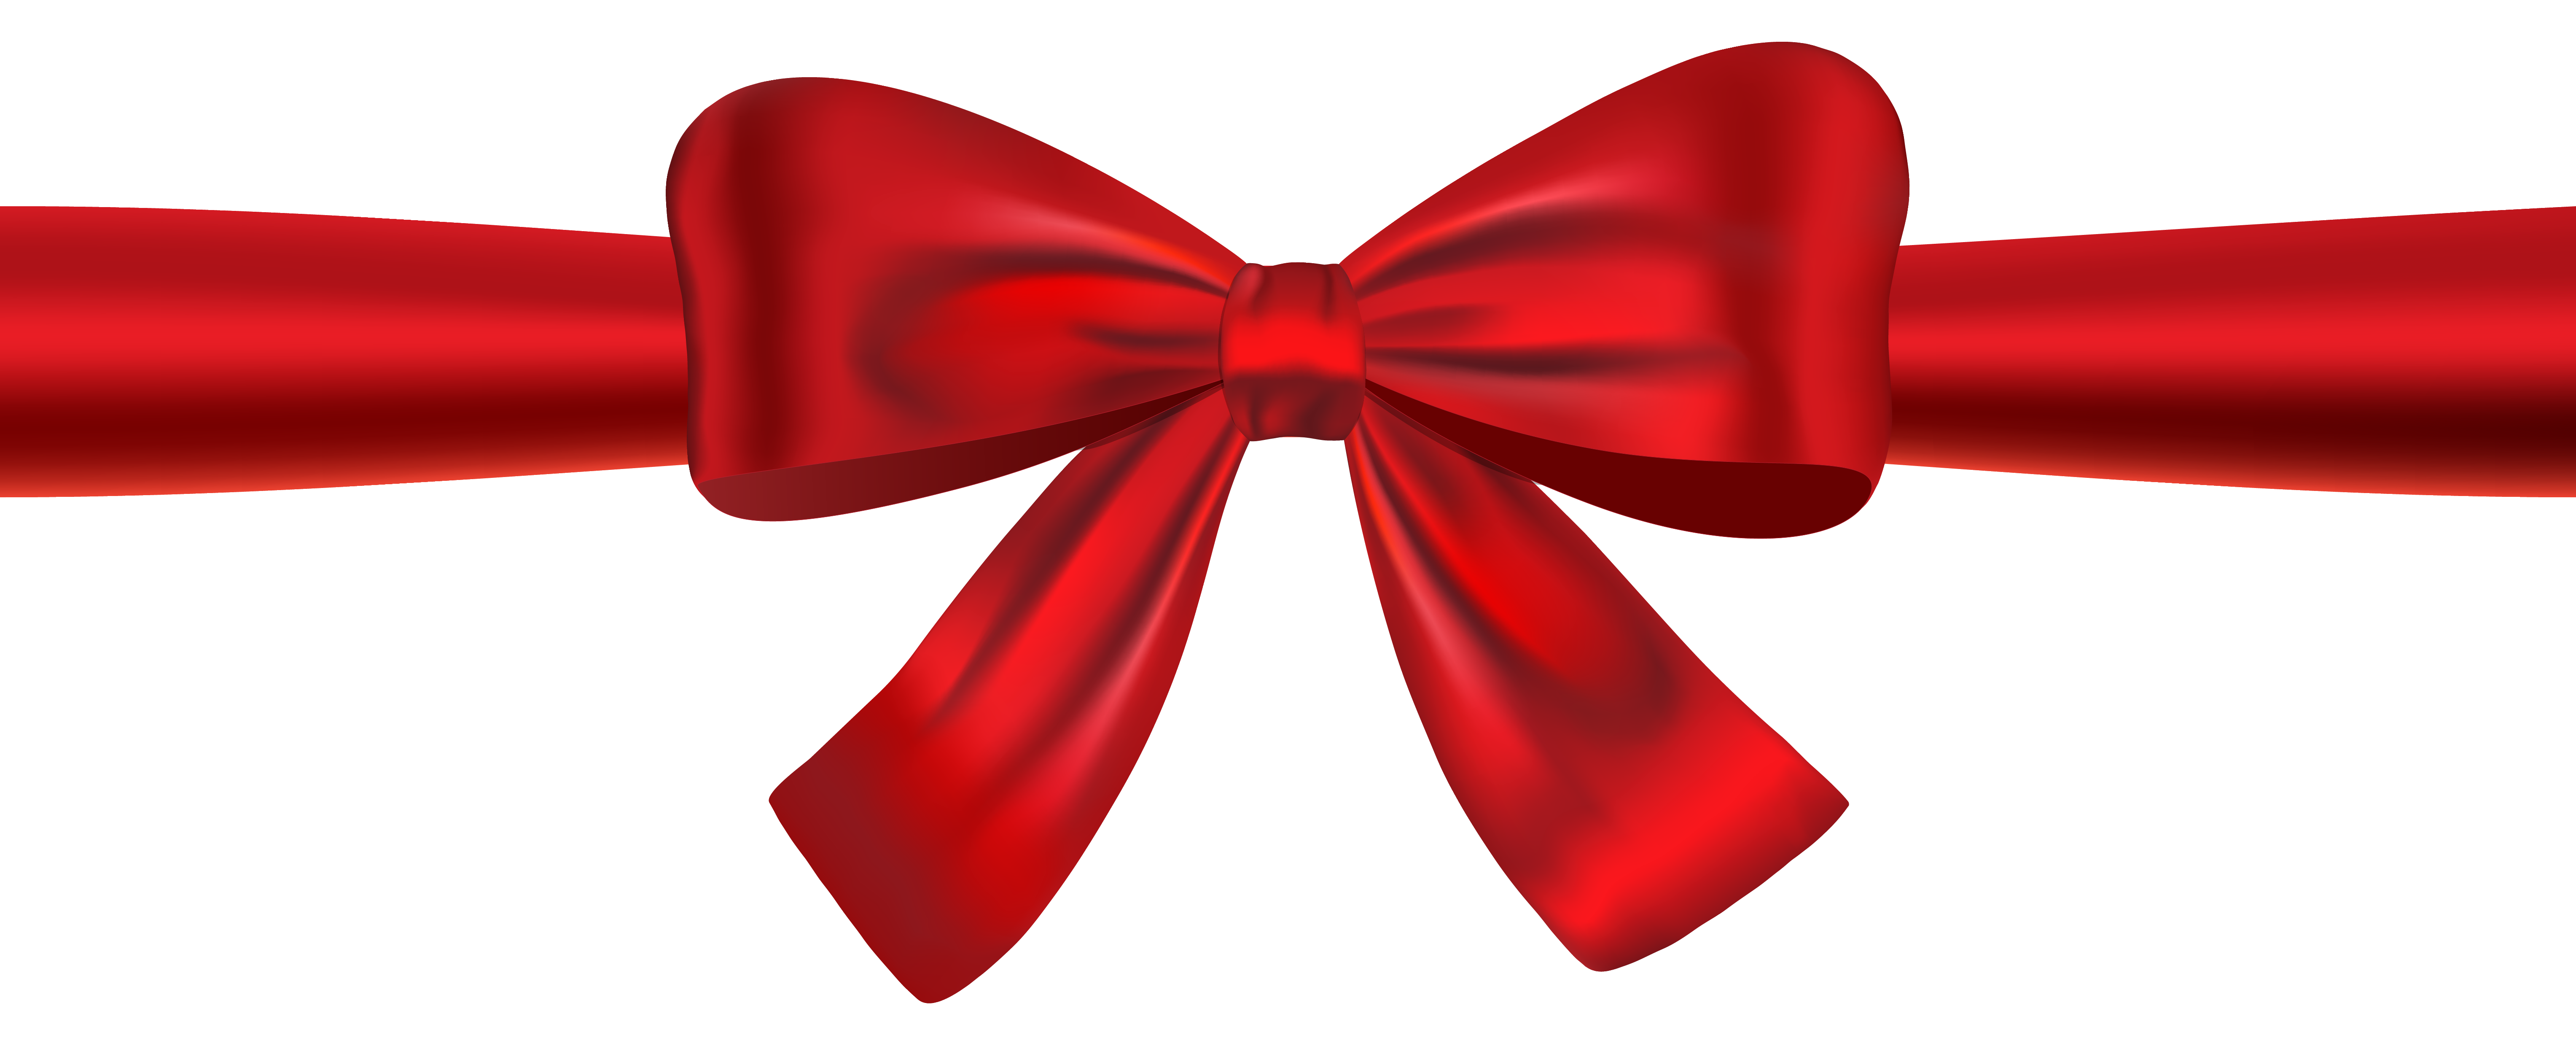 Red Ribbon and Bow PNG Clipart Image